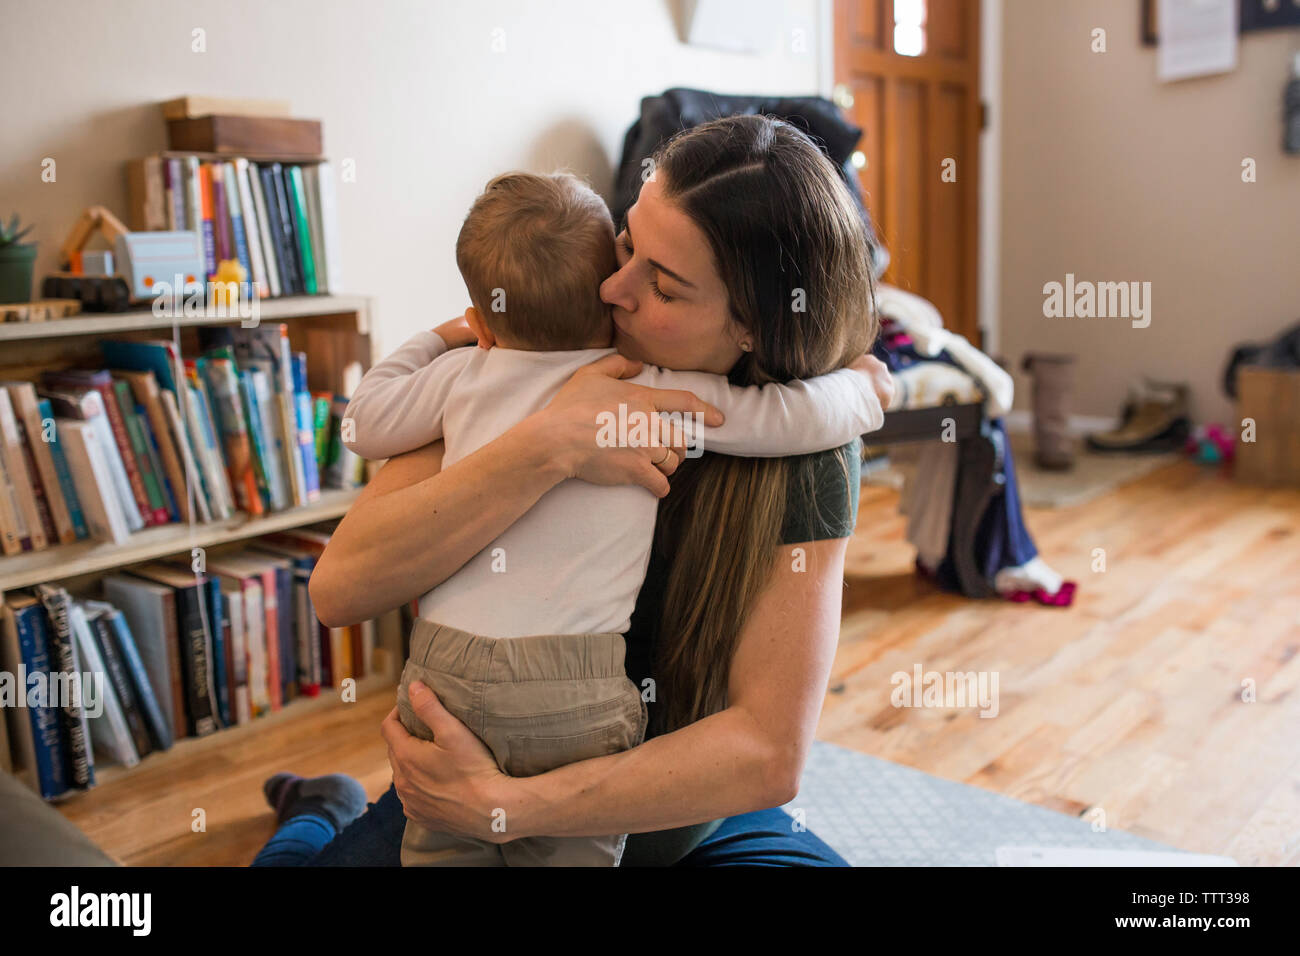 Pregnant mother embracing son at home Stock Photo